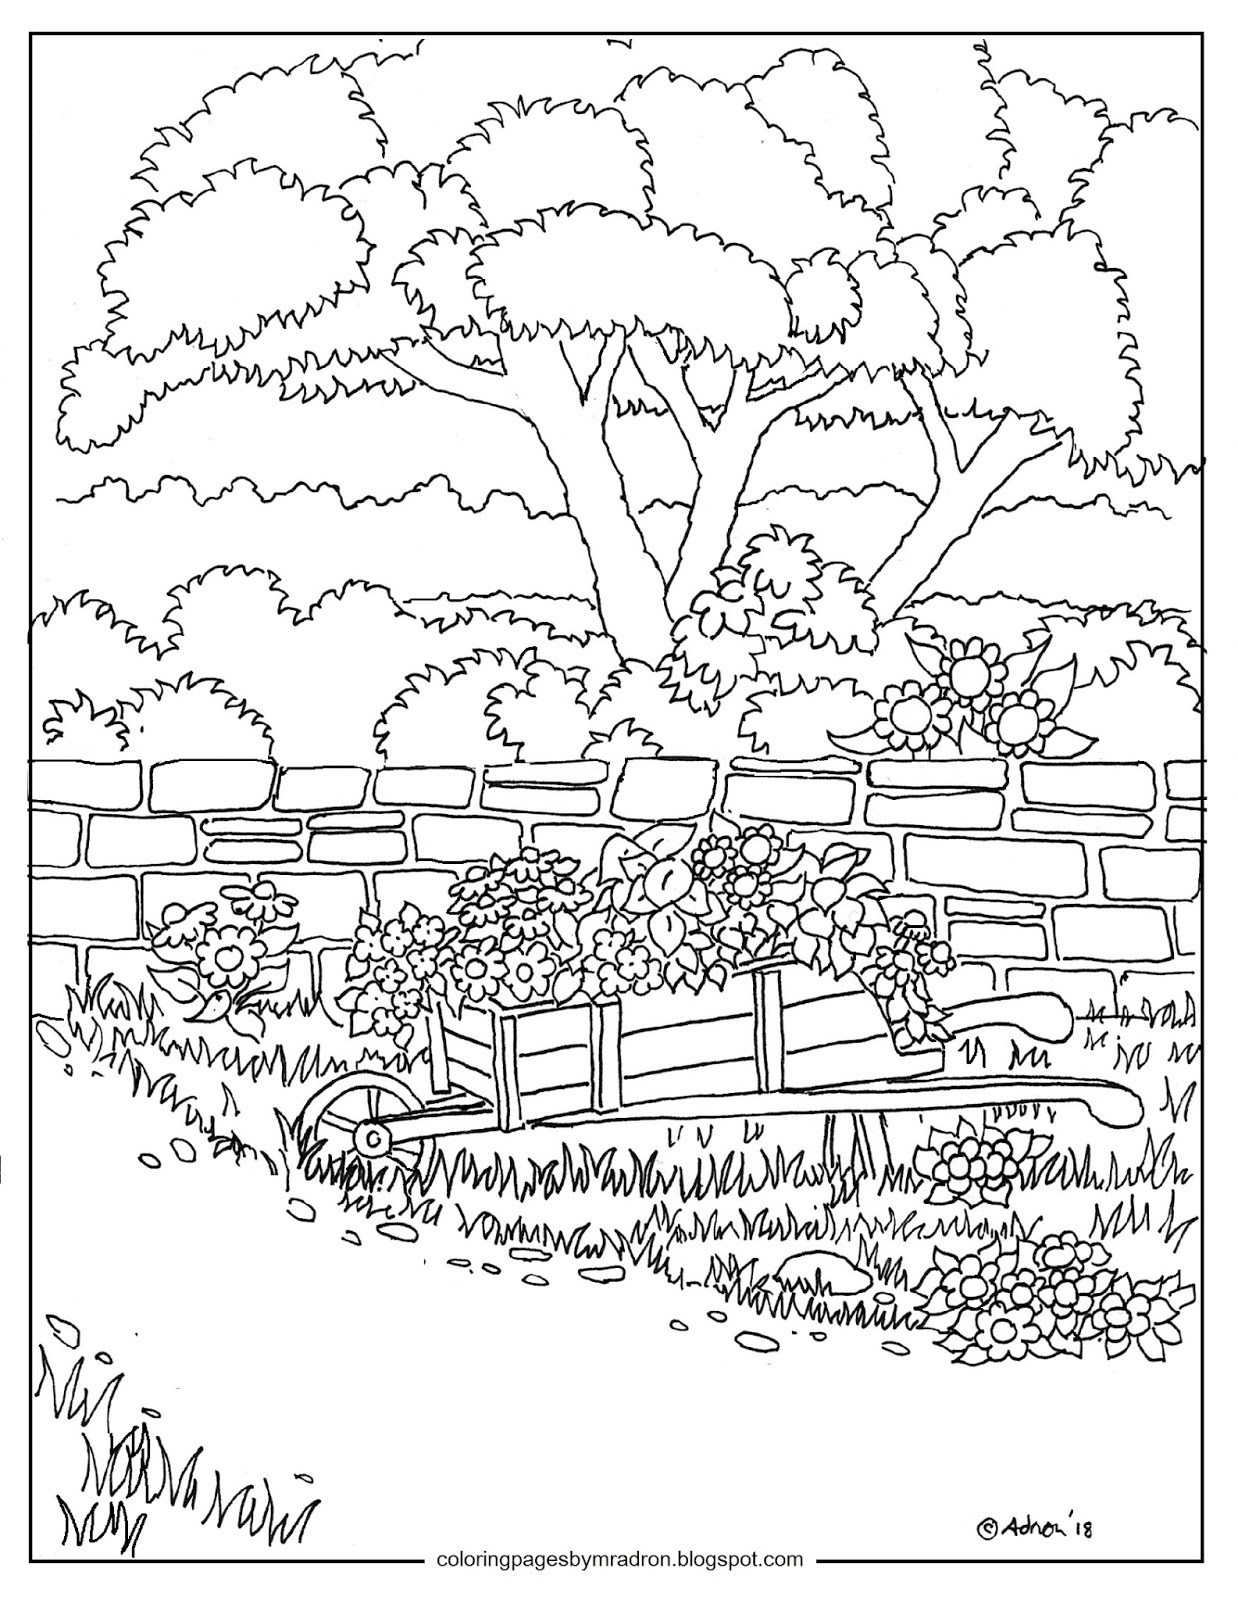 Download Coloring Pages for Kids by Mr. Adron: Wheelbarrow of flowers in garden printable coloring page.